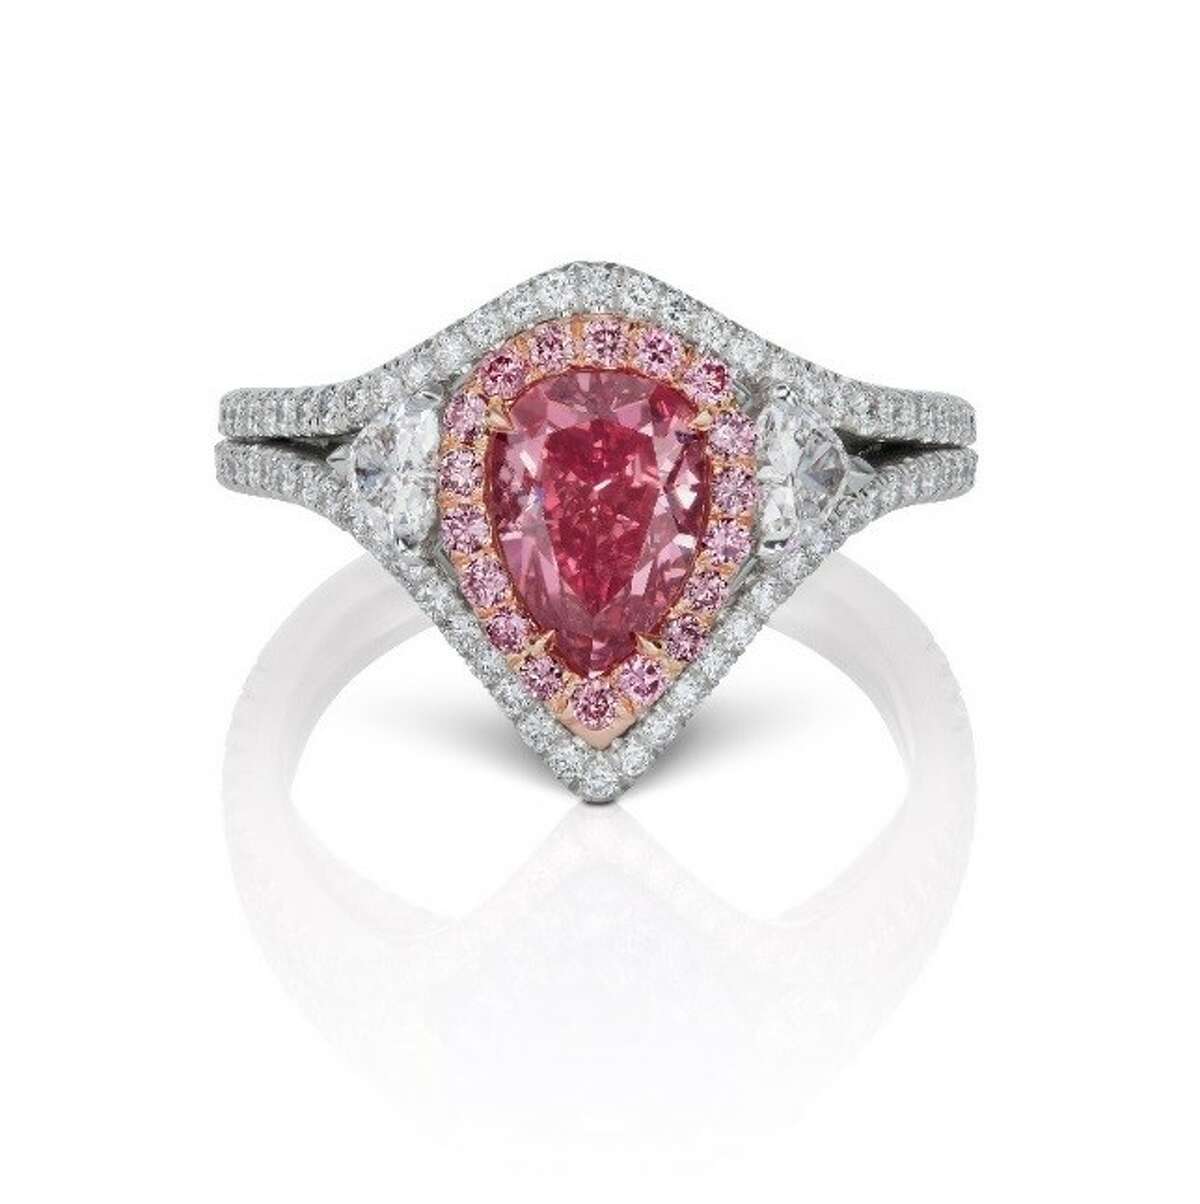 This saturated Vivid Pink pear-shaped Argyle Pink diamond is going for $1,900,000 at Americus Diamond.